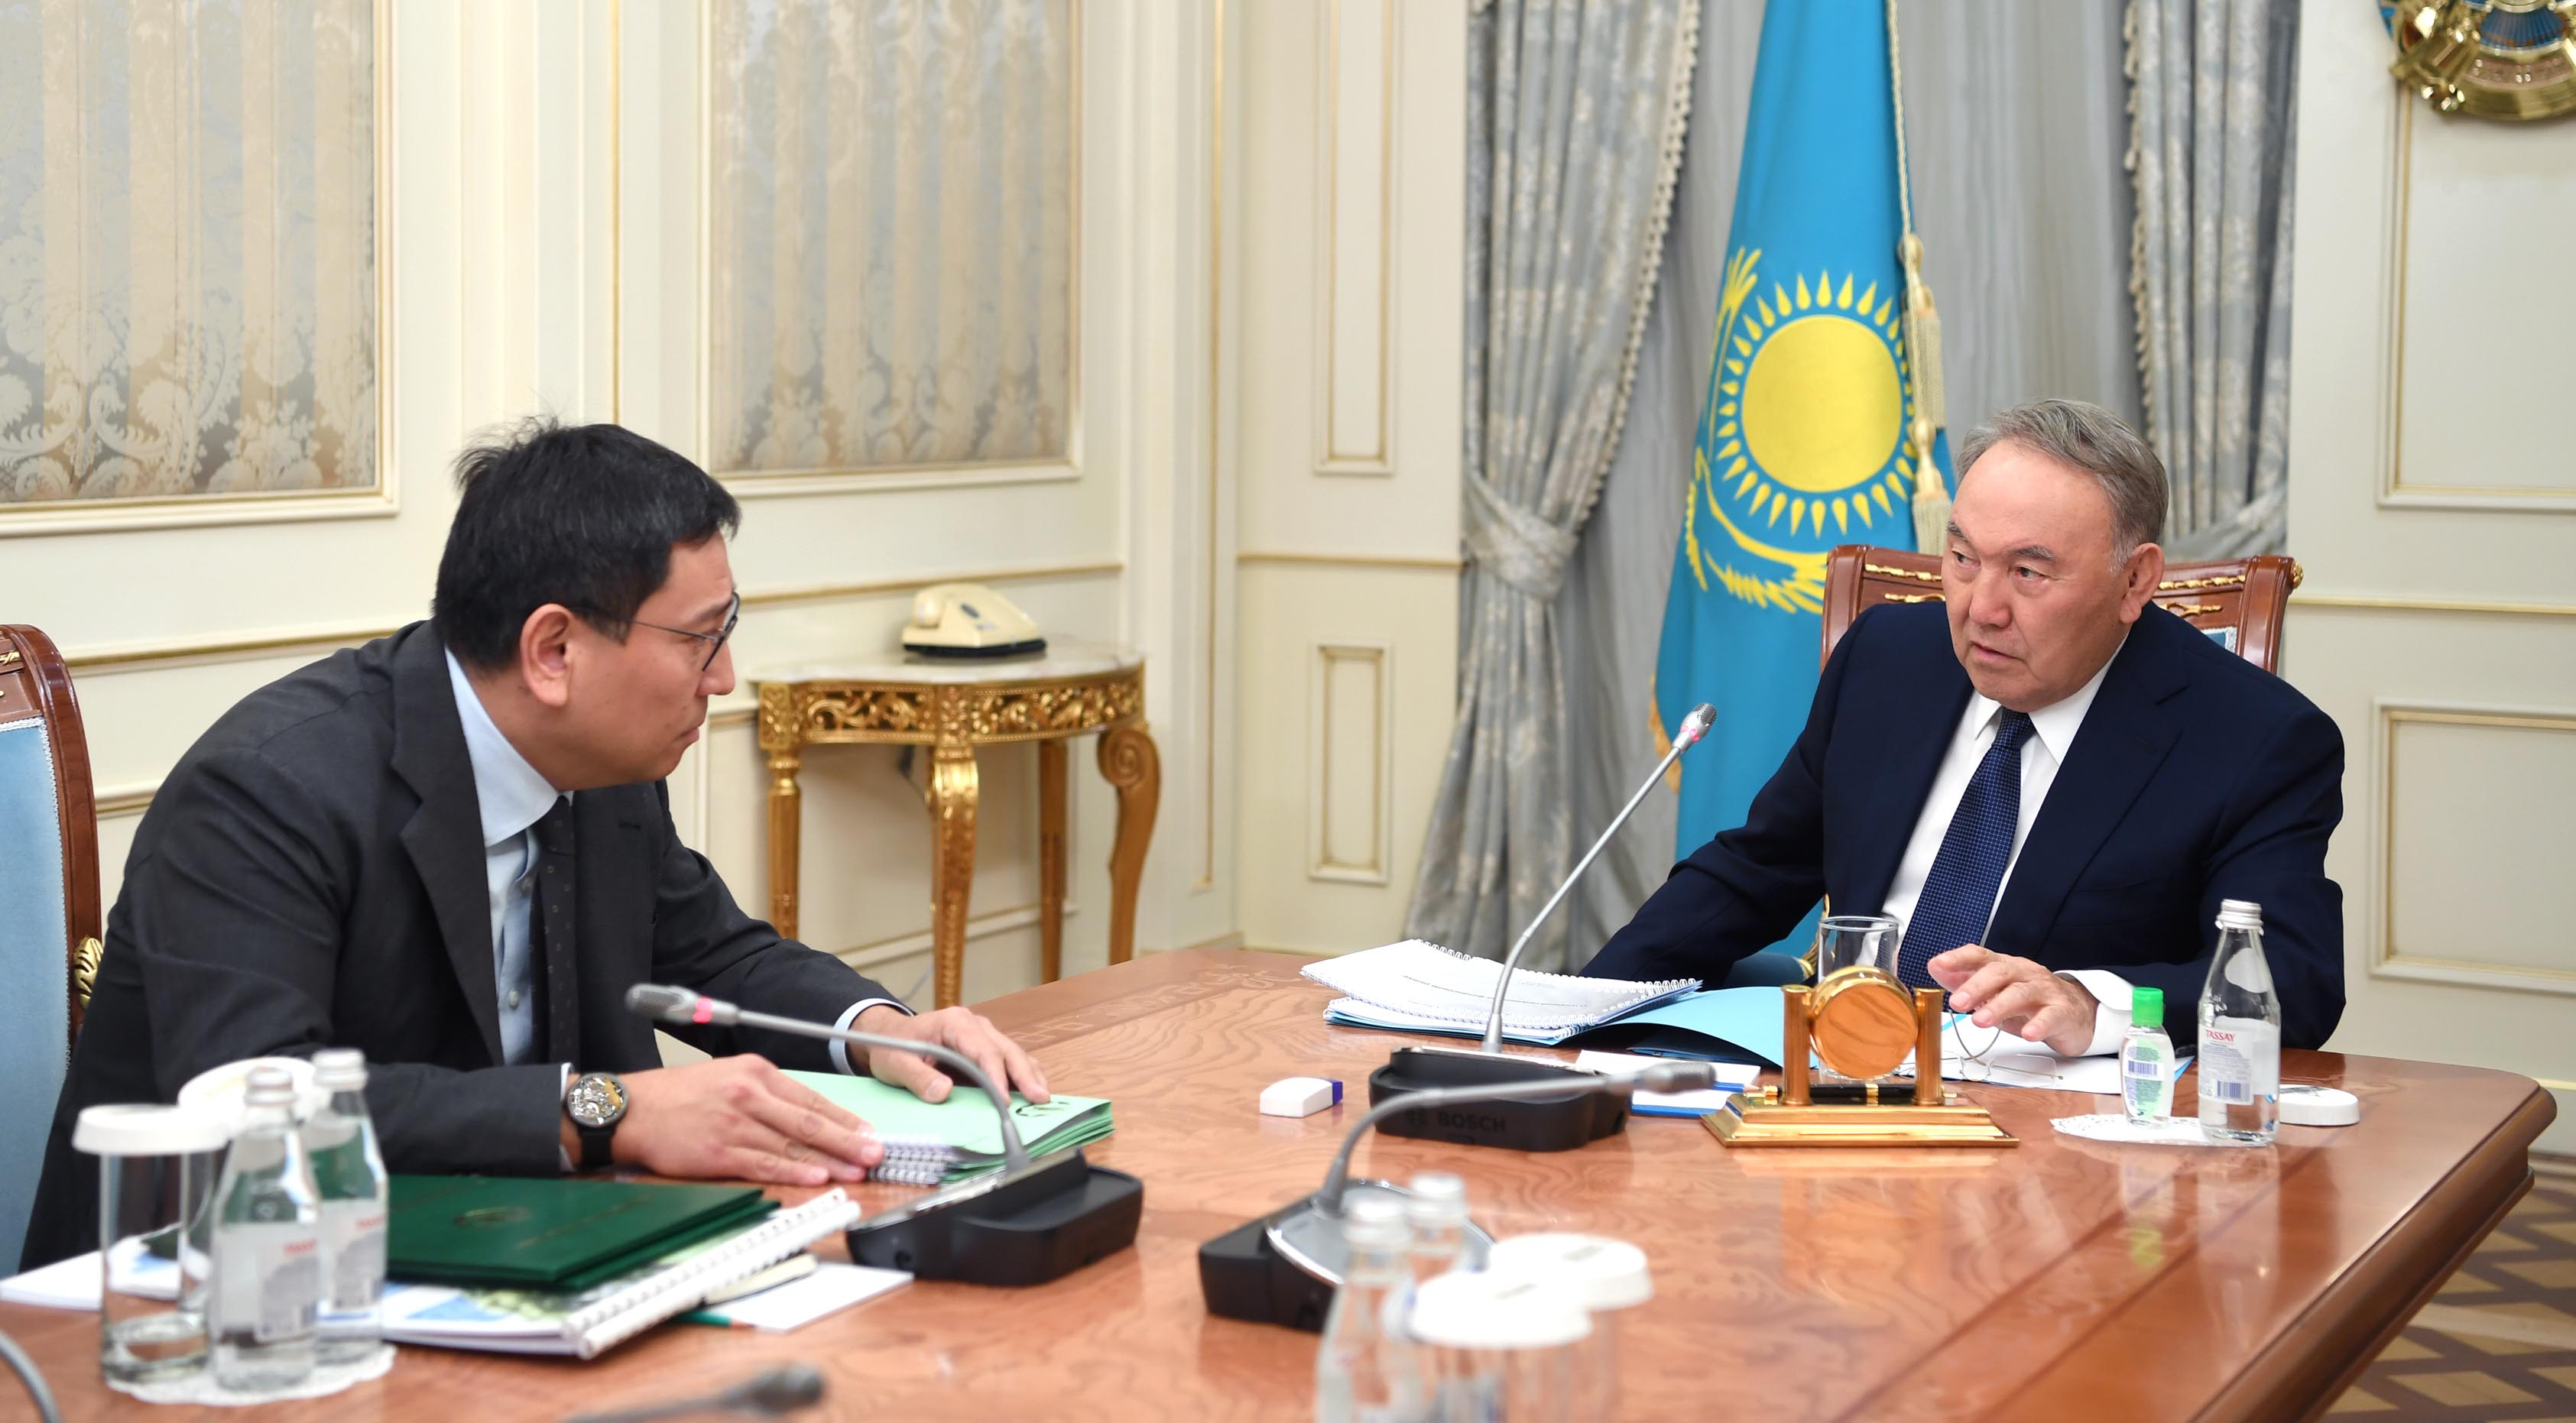 Nursultan Nazarbayev meets with Chairman of the National Bank Yerbolat Dossayev